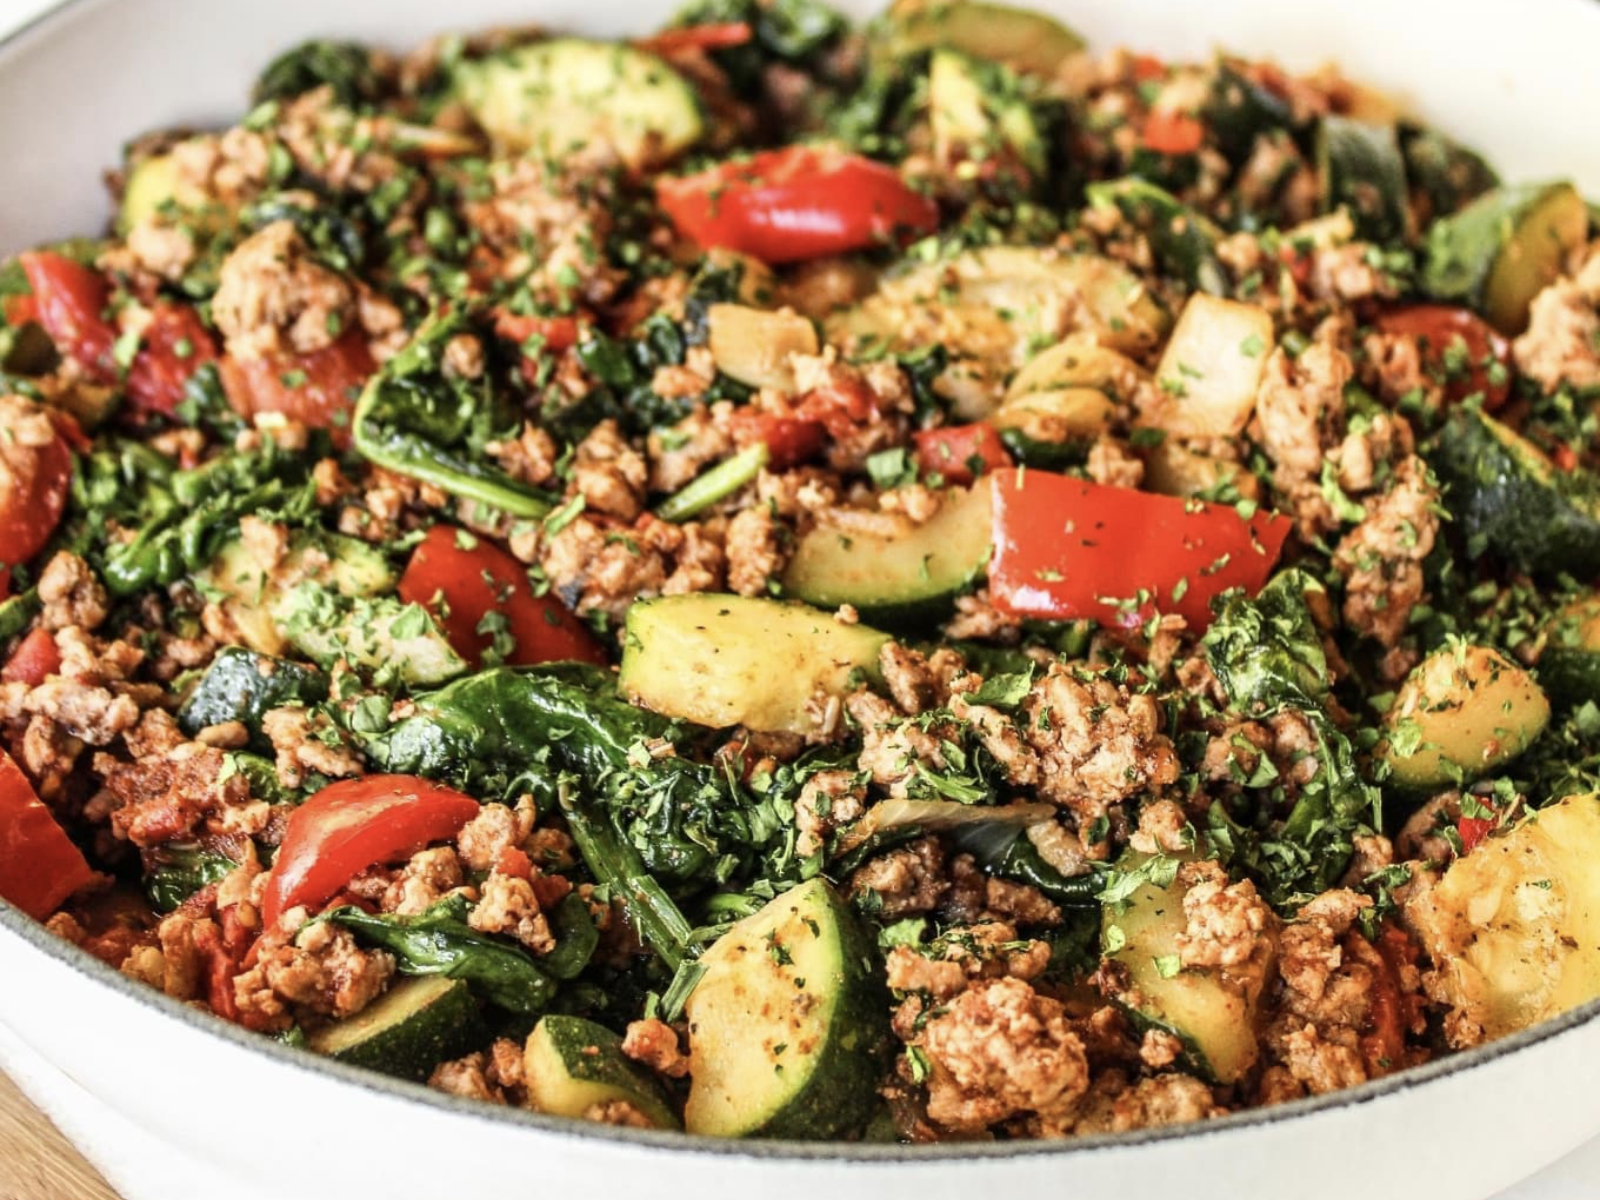 skillet with zucchini and veggies and cooked ground turkey